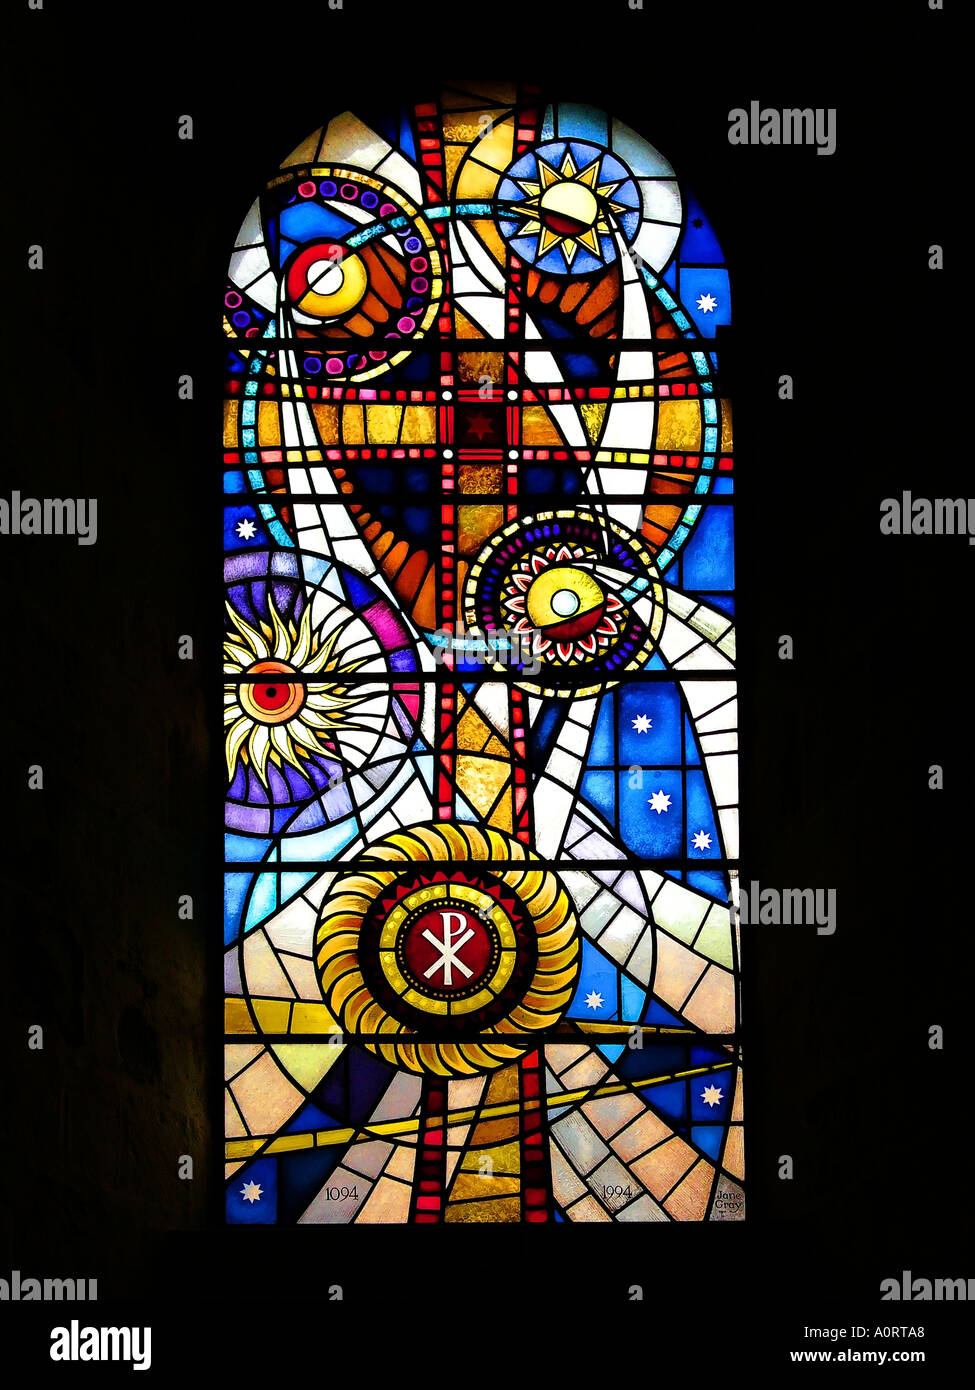 The 900th Anniversary Stained Glass Window at The Priory Christchurch Dorset United Kingdom Stock Photo